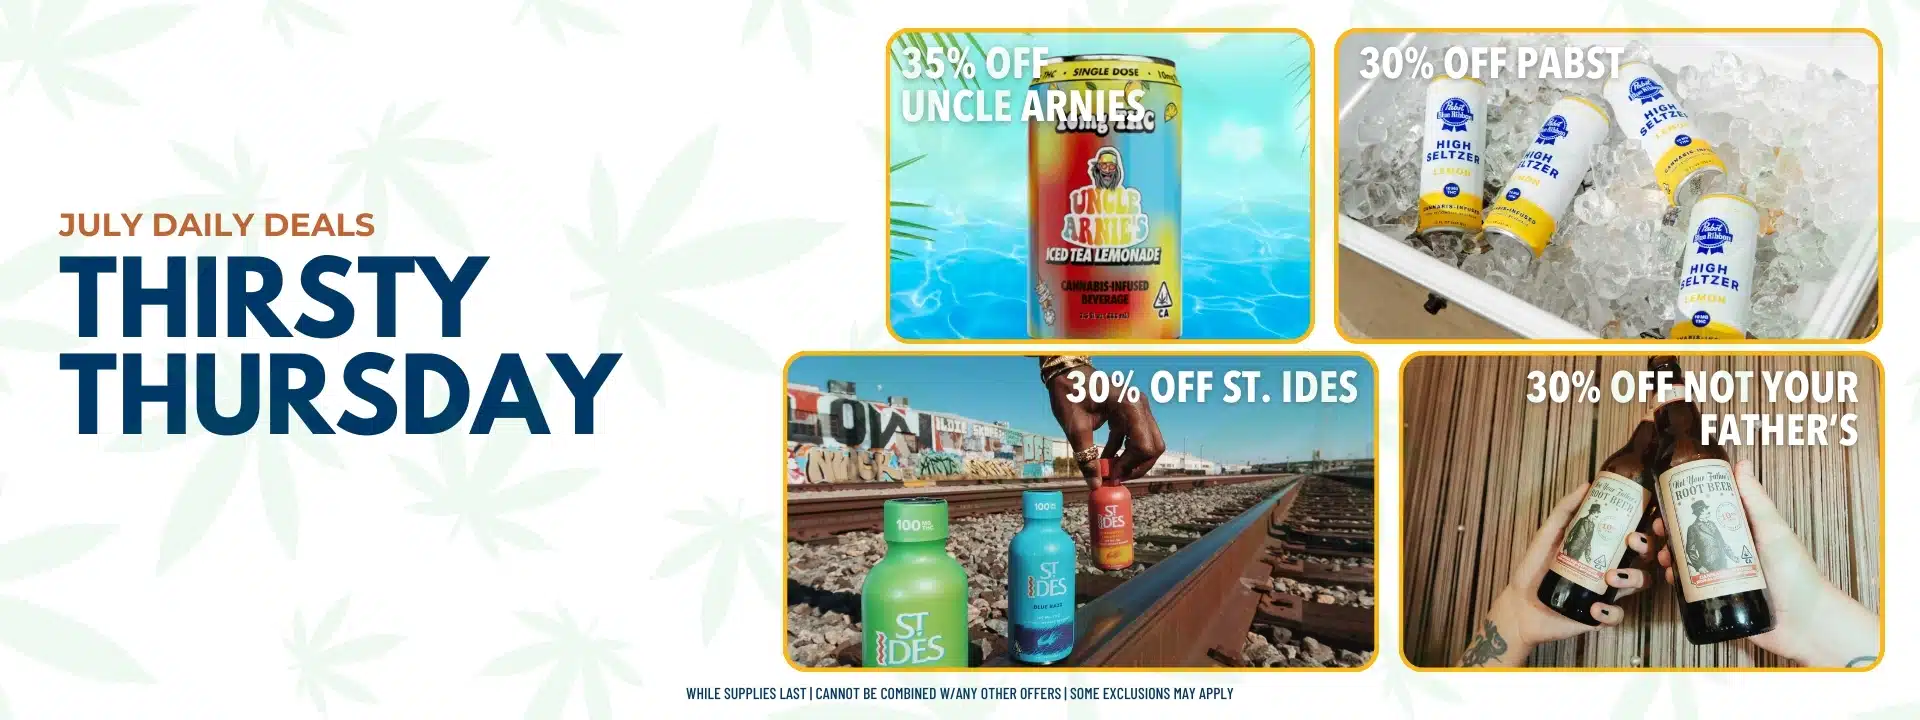 Product images with text overlay that reads: July Daily Deals Thirsty Thursday. 35% off Uncle Arnies, 30% off Pabst, 30% off St. Ides, 30% off Not Your Father's.